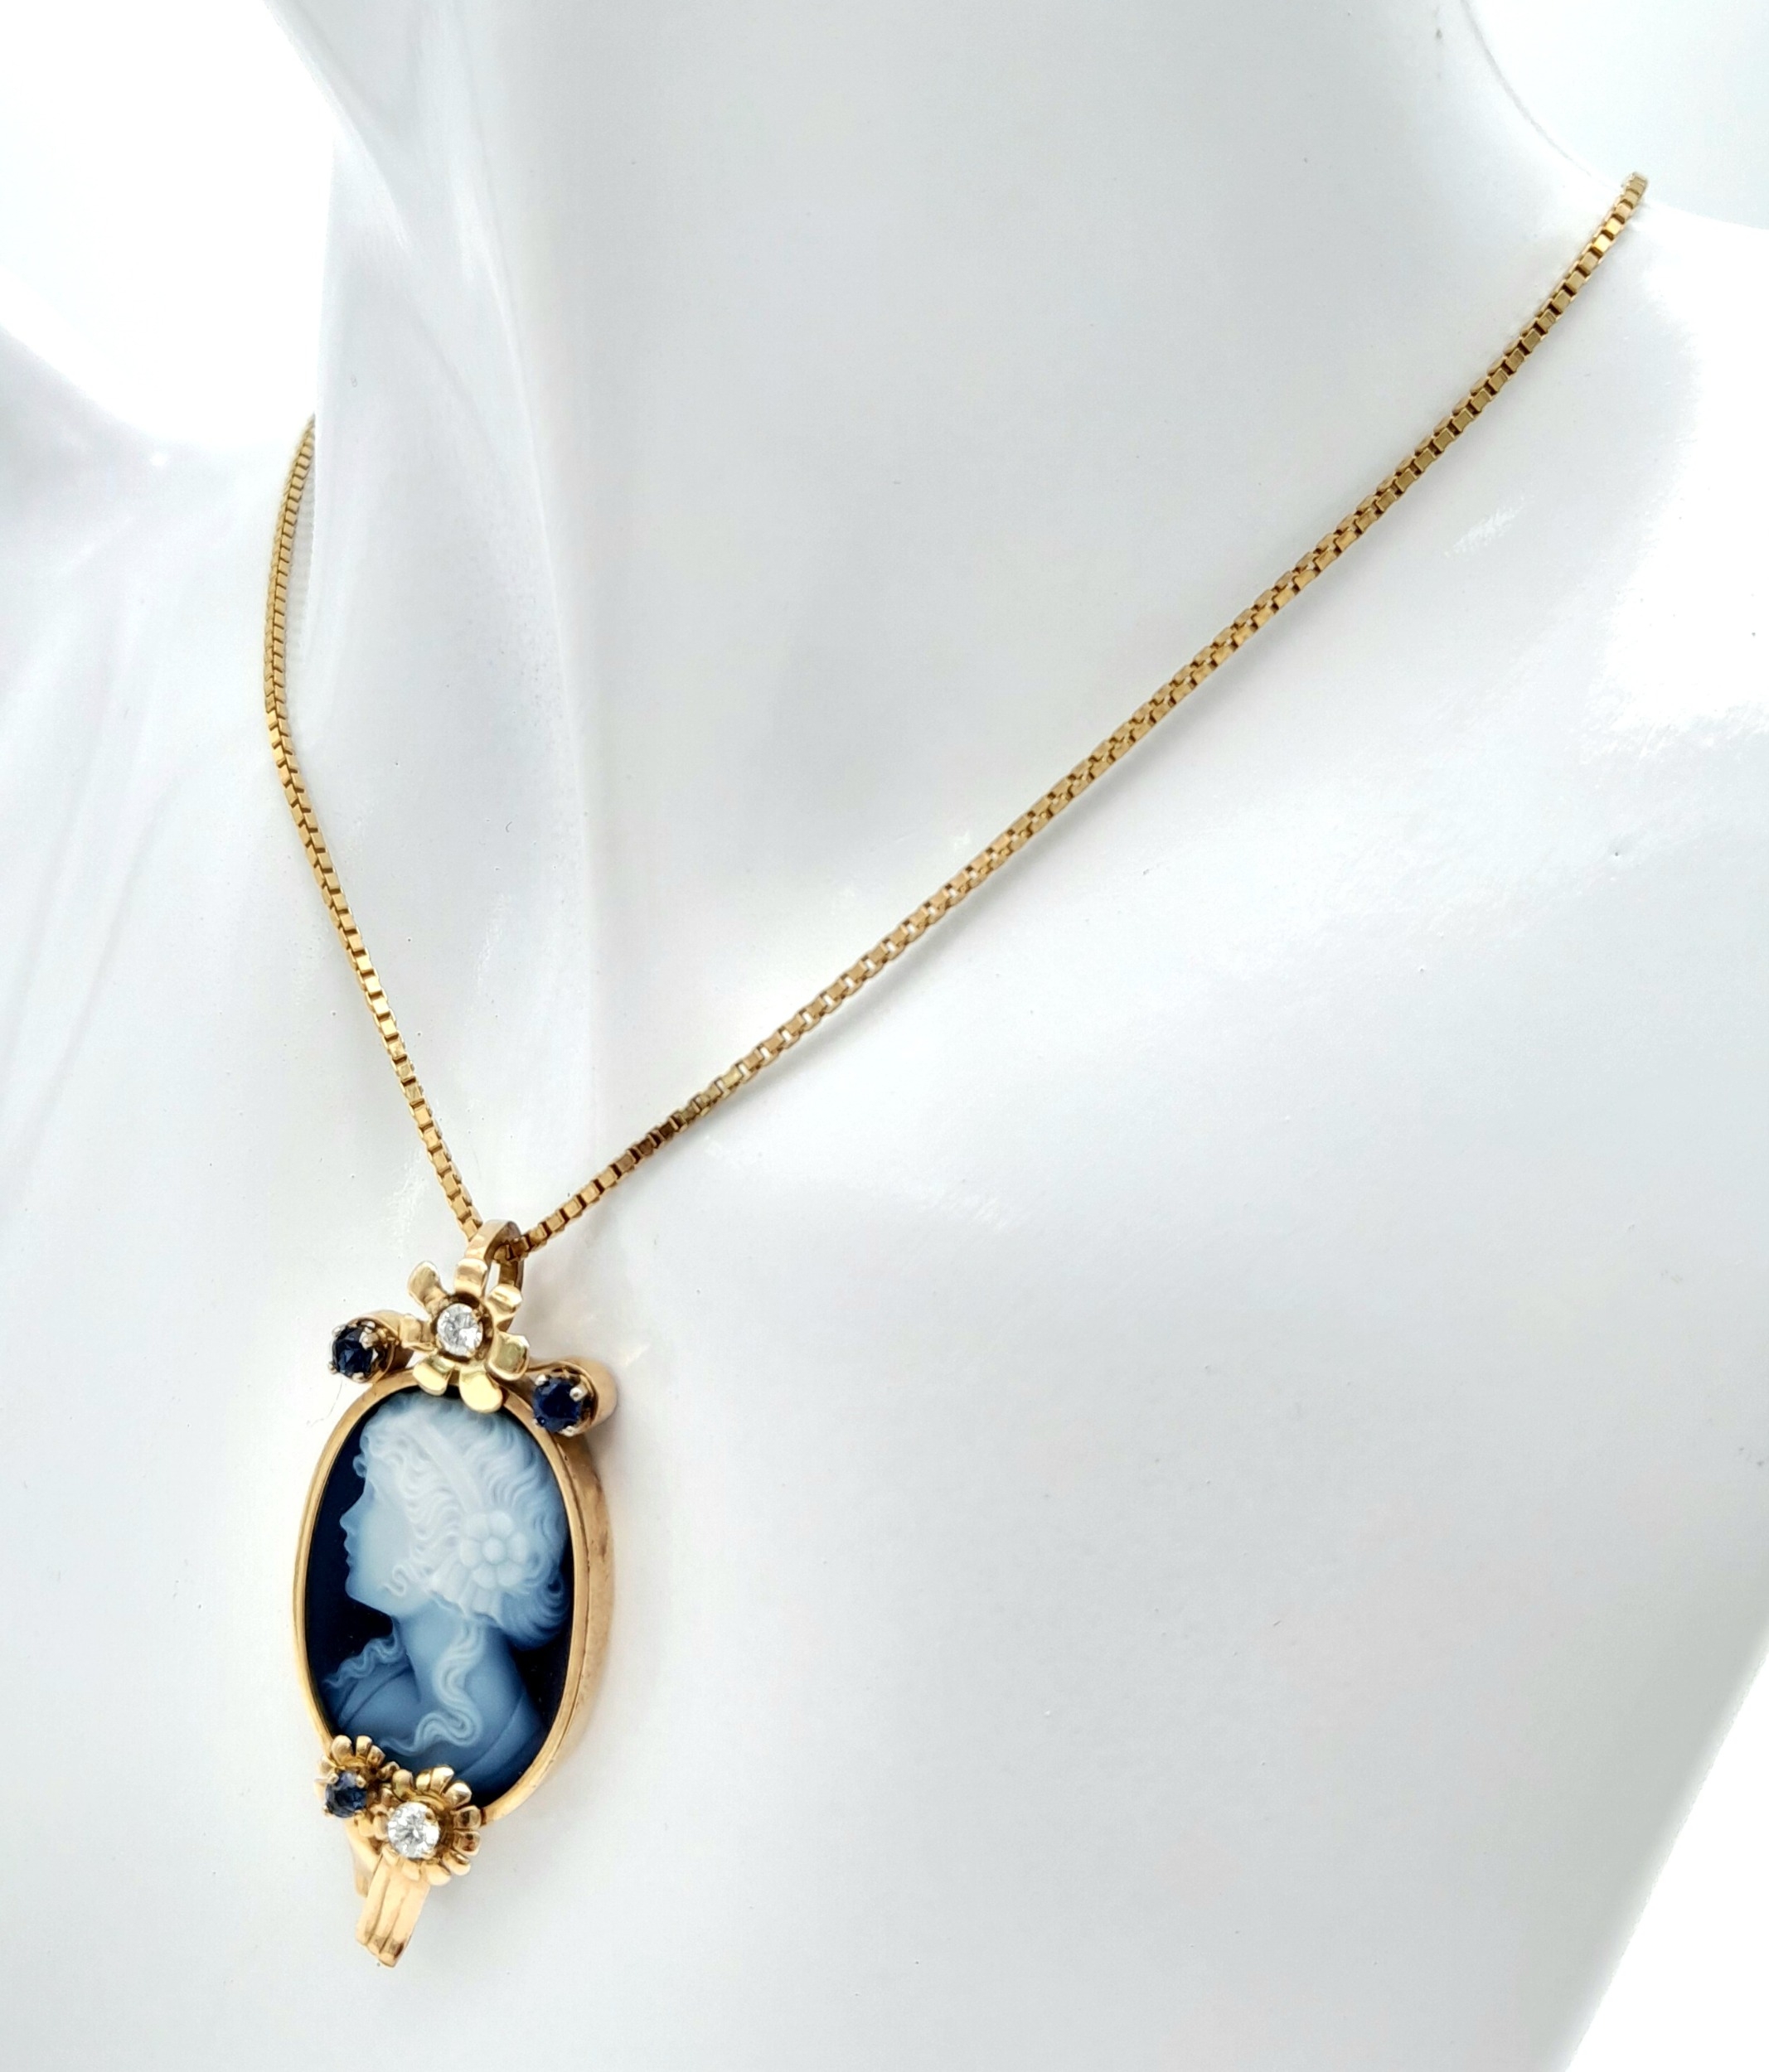 A Beautiful 9K Gold, Cameo Pendant with Sapphire and Diamond decoration on a 9K link chain. - Image 2 of 6